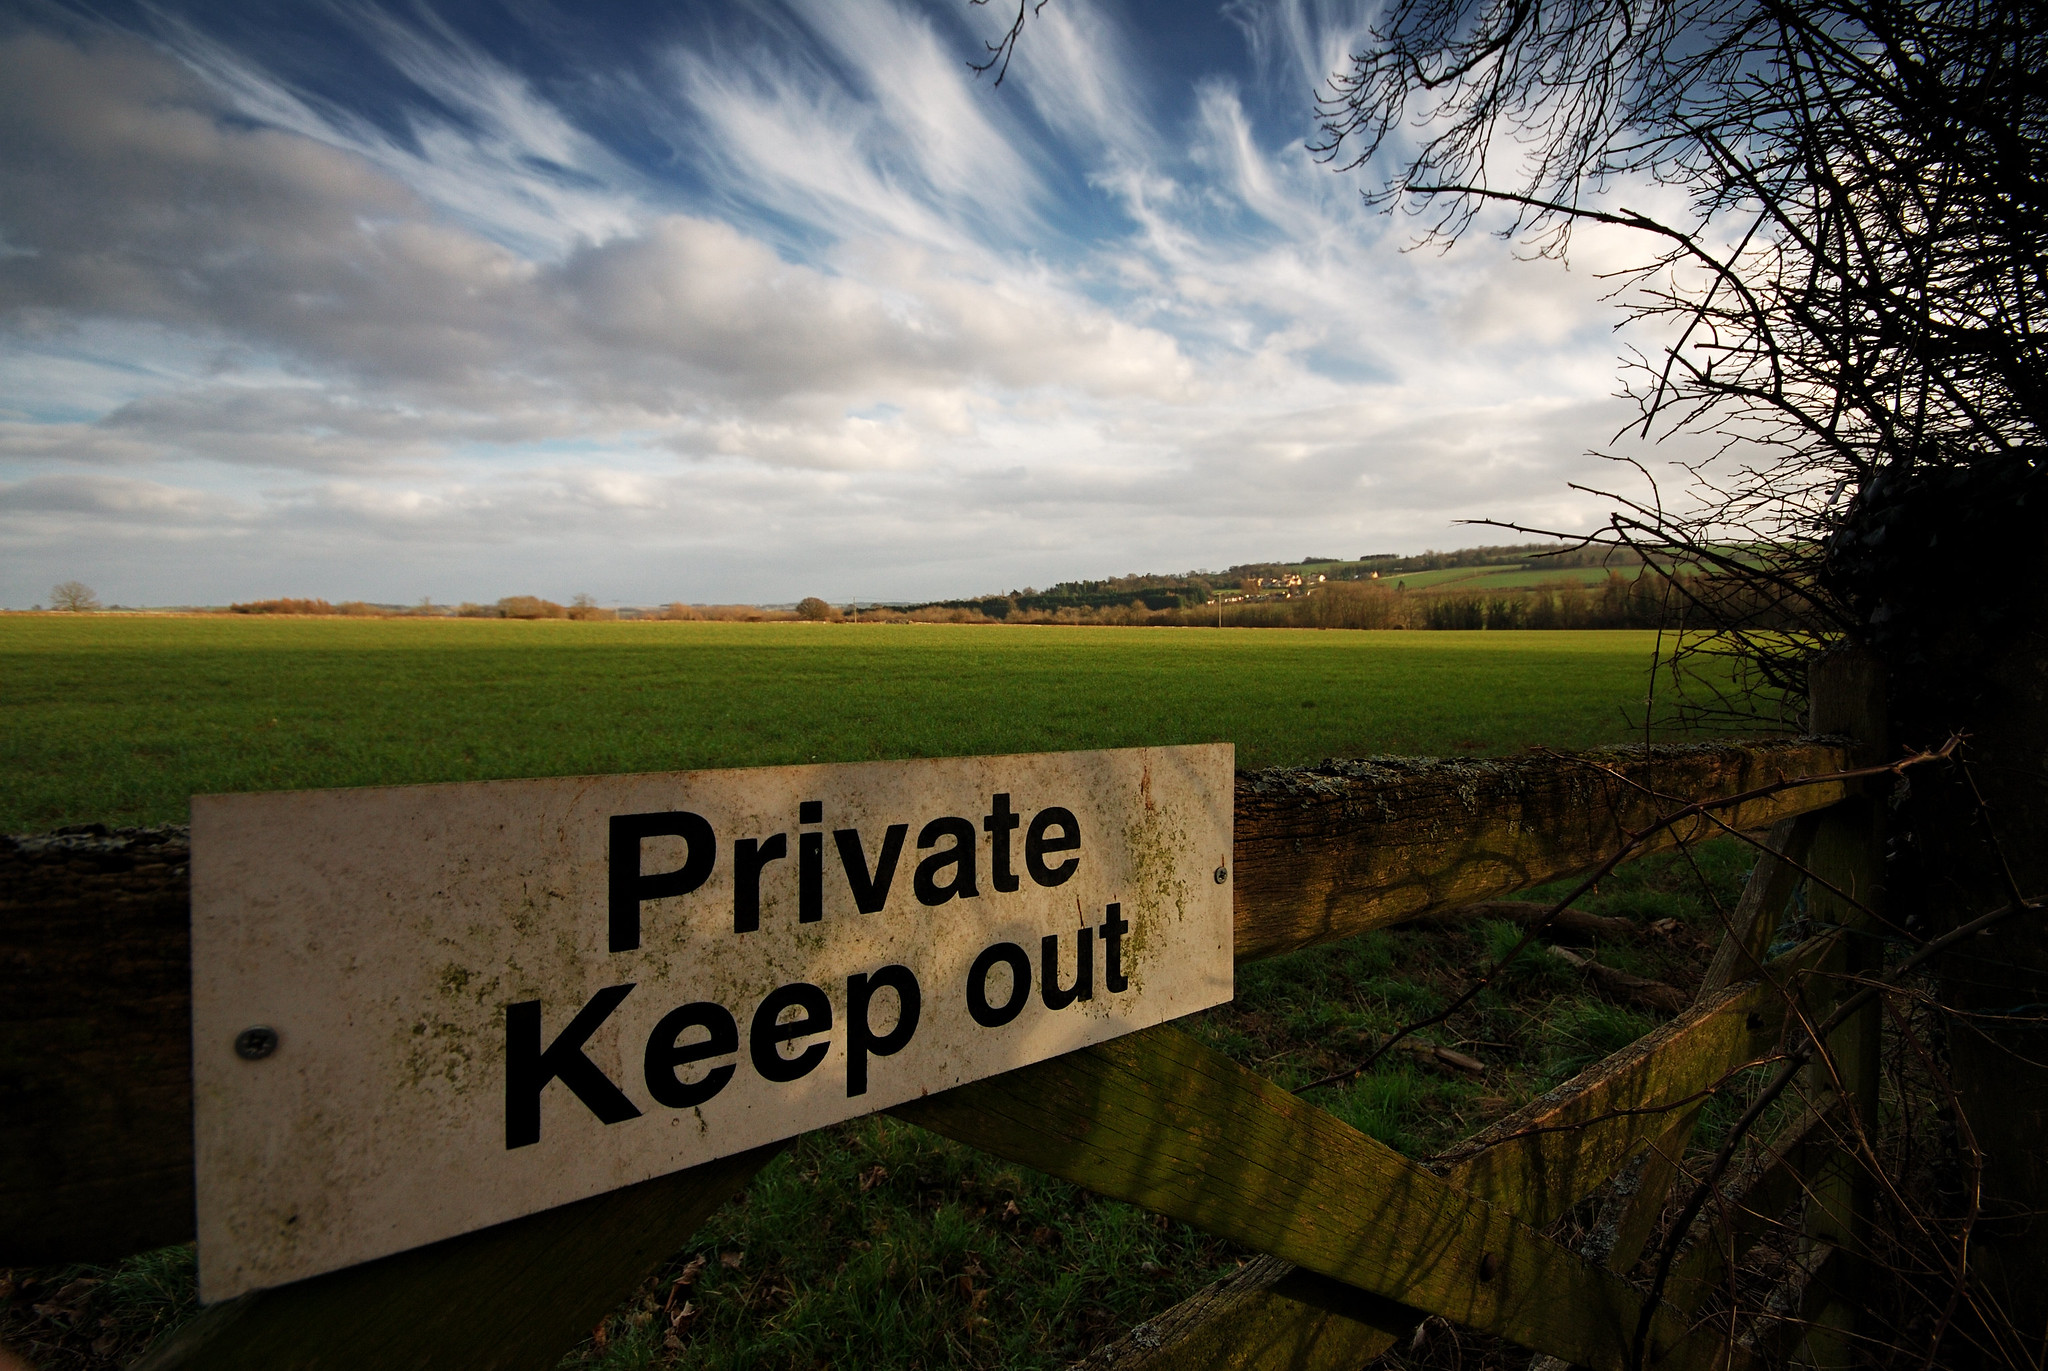 Sign saying 'Private Keep out' by a field in England